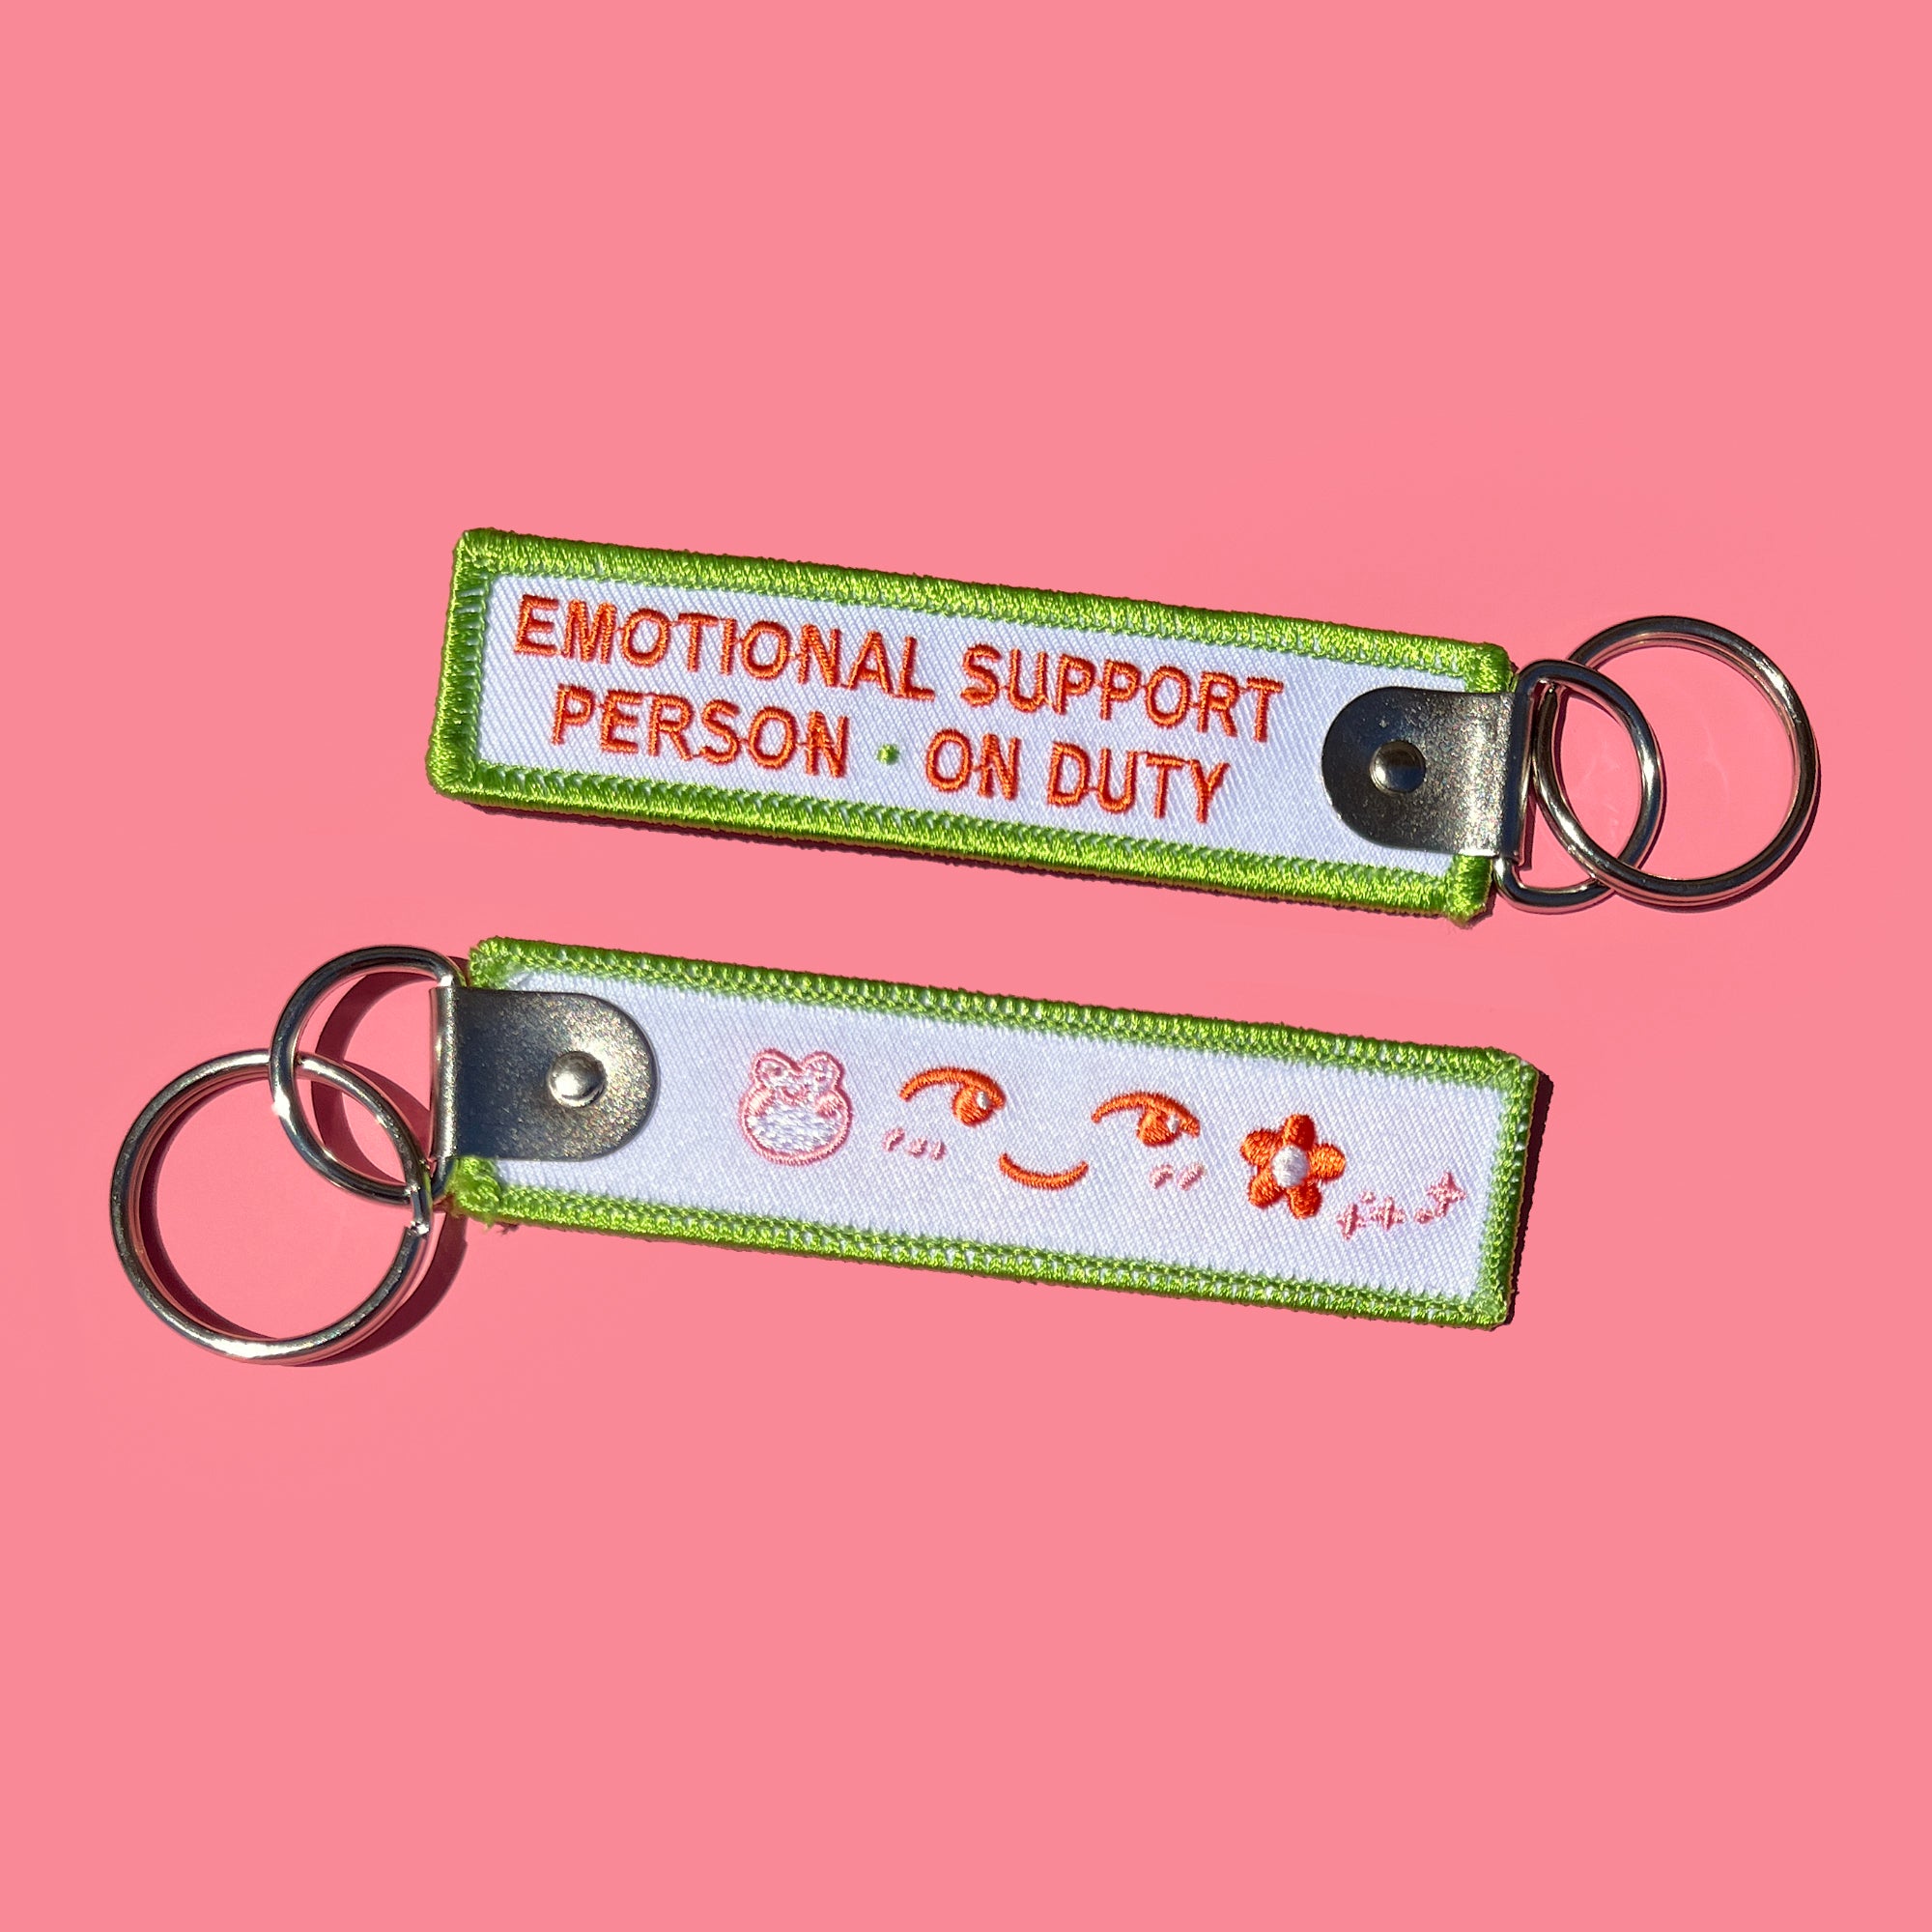 Emotional Support Person On Duty Keychain